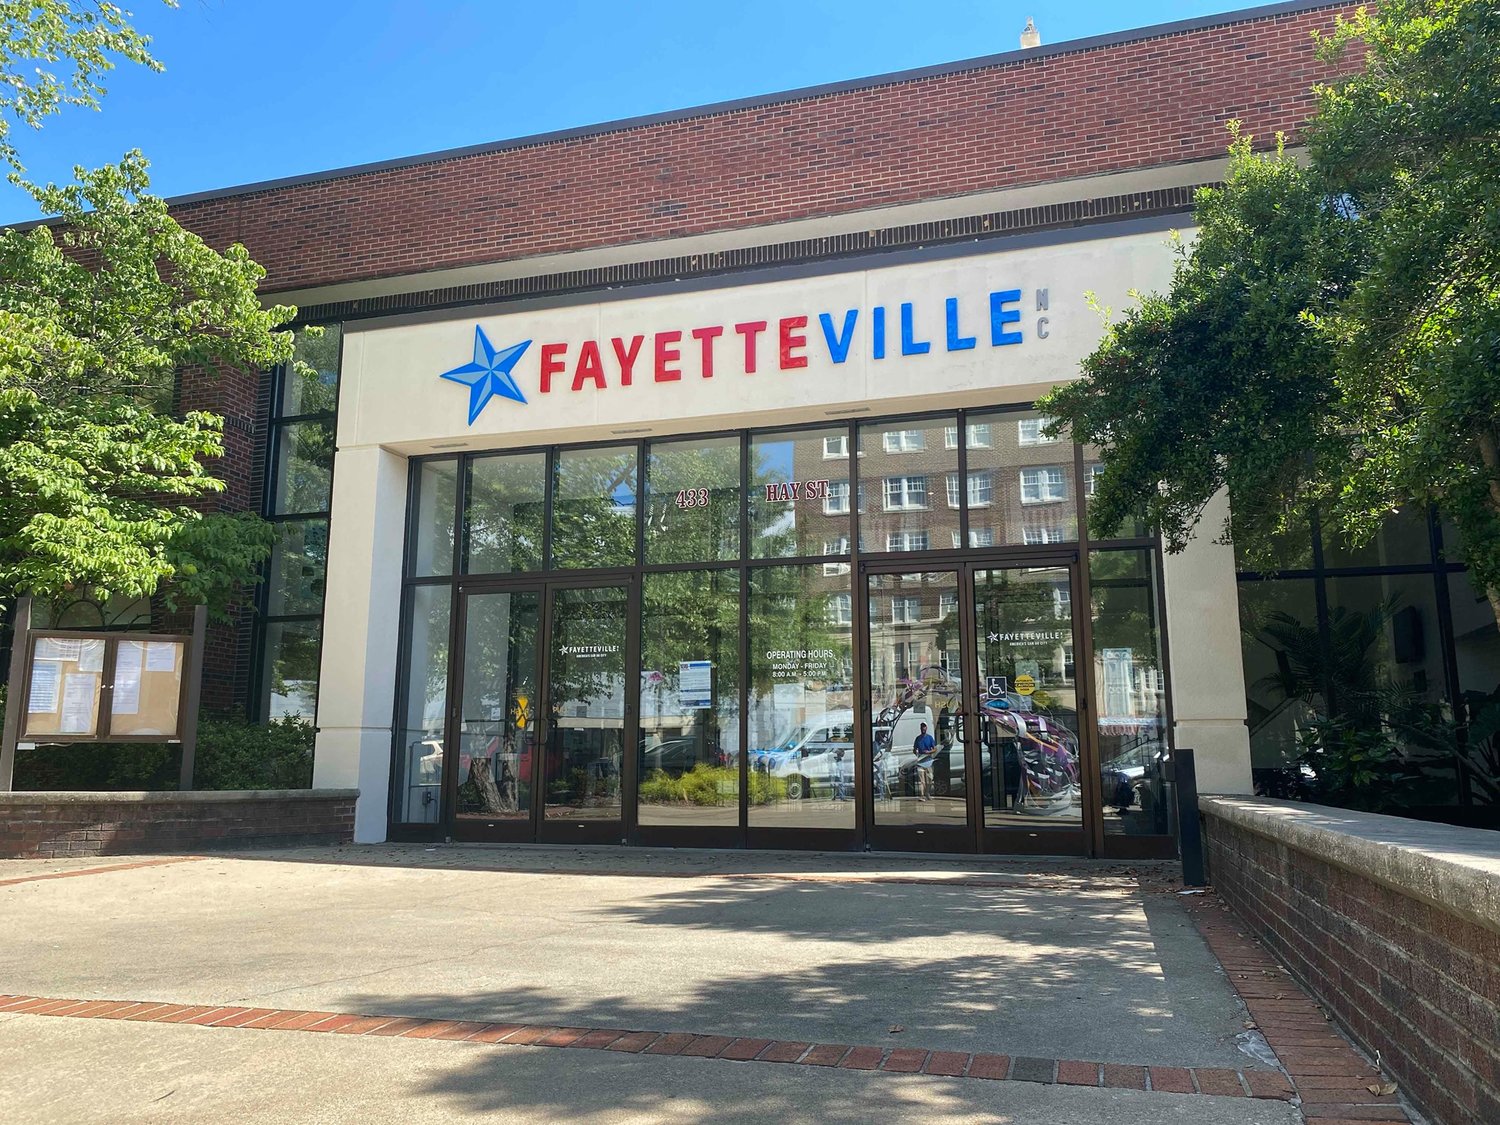 The Fayetteville City Council discussed raising salaries for seasonal and part-time workers during a budget work session Thursday night.